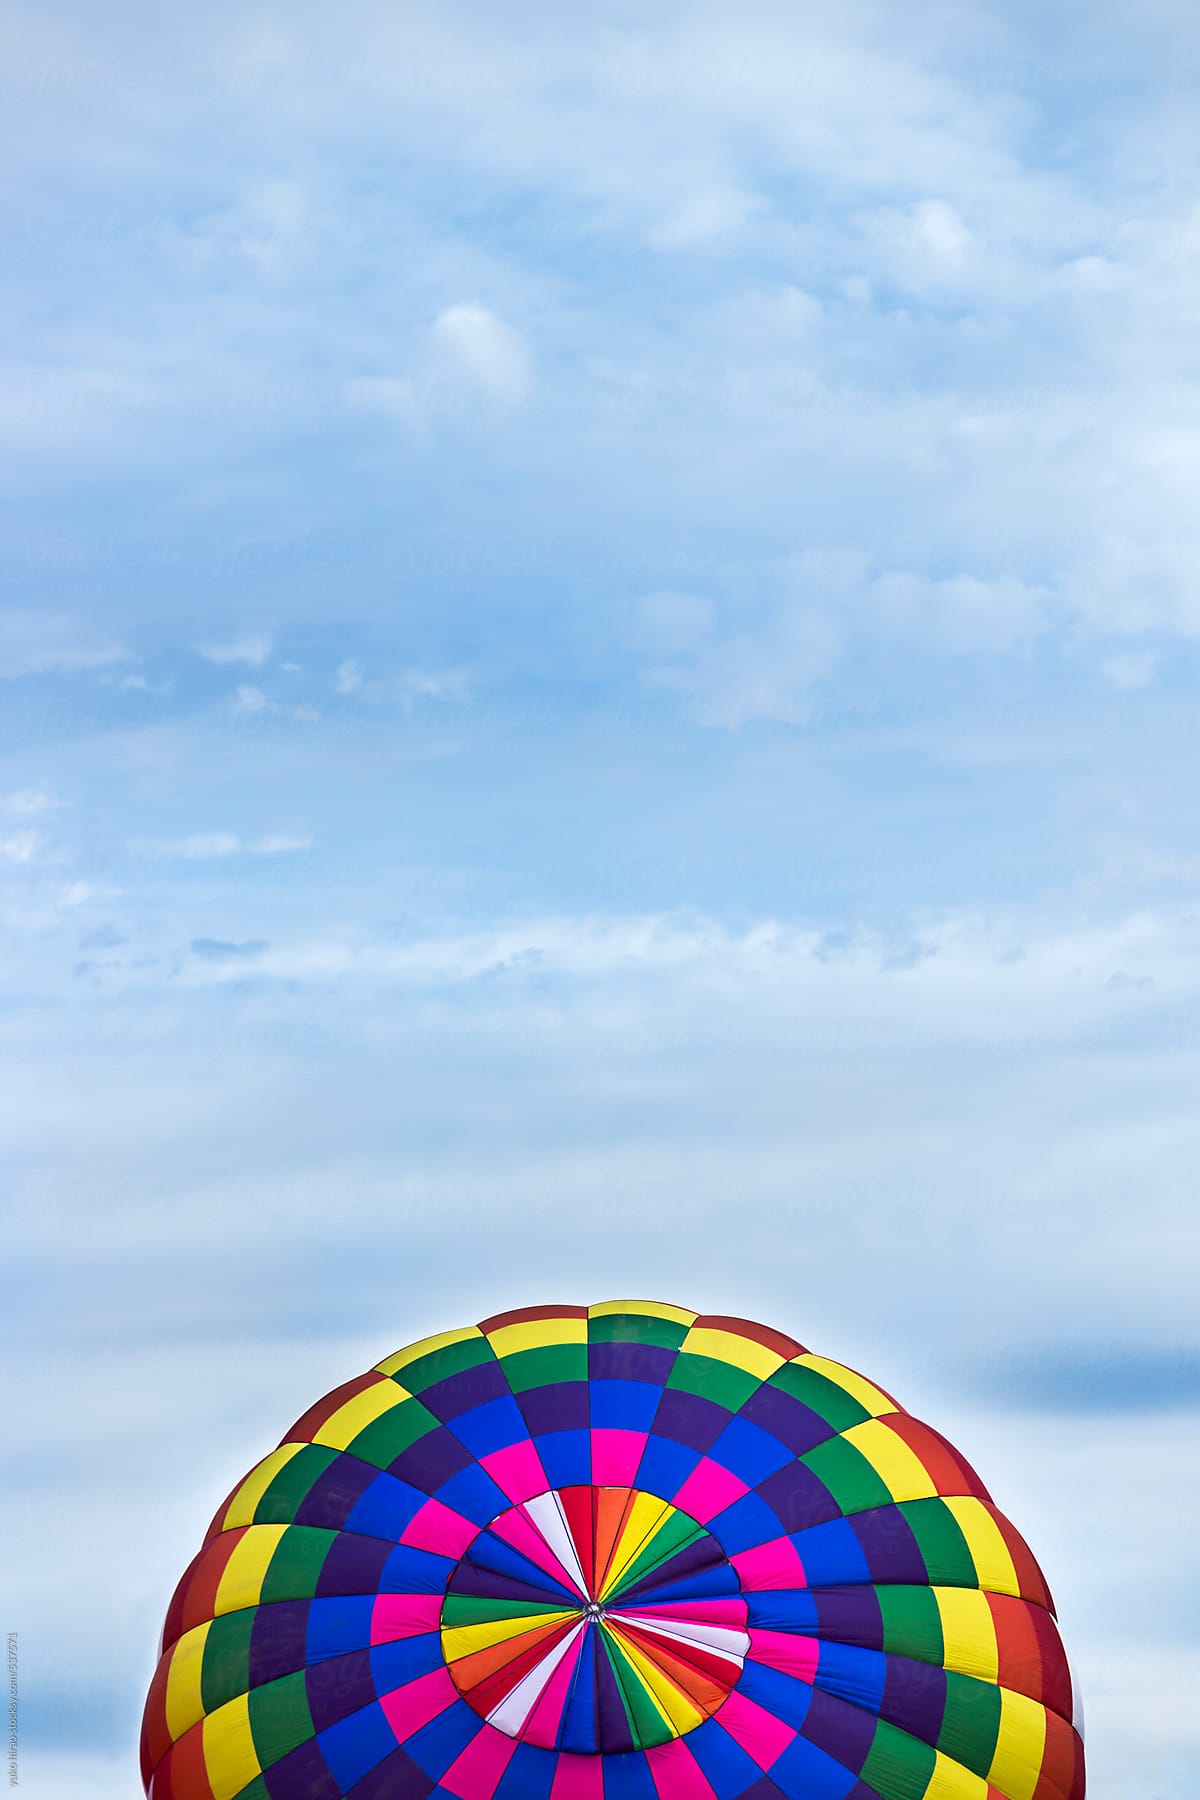 Calorful pattern of a hot air balloon against clouds